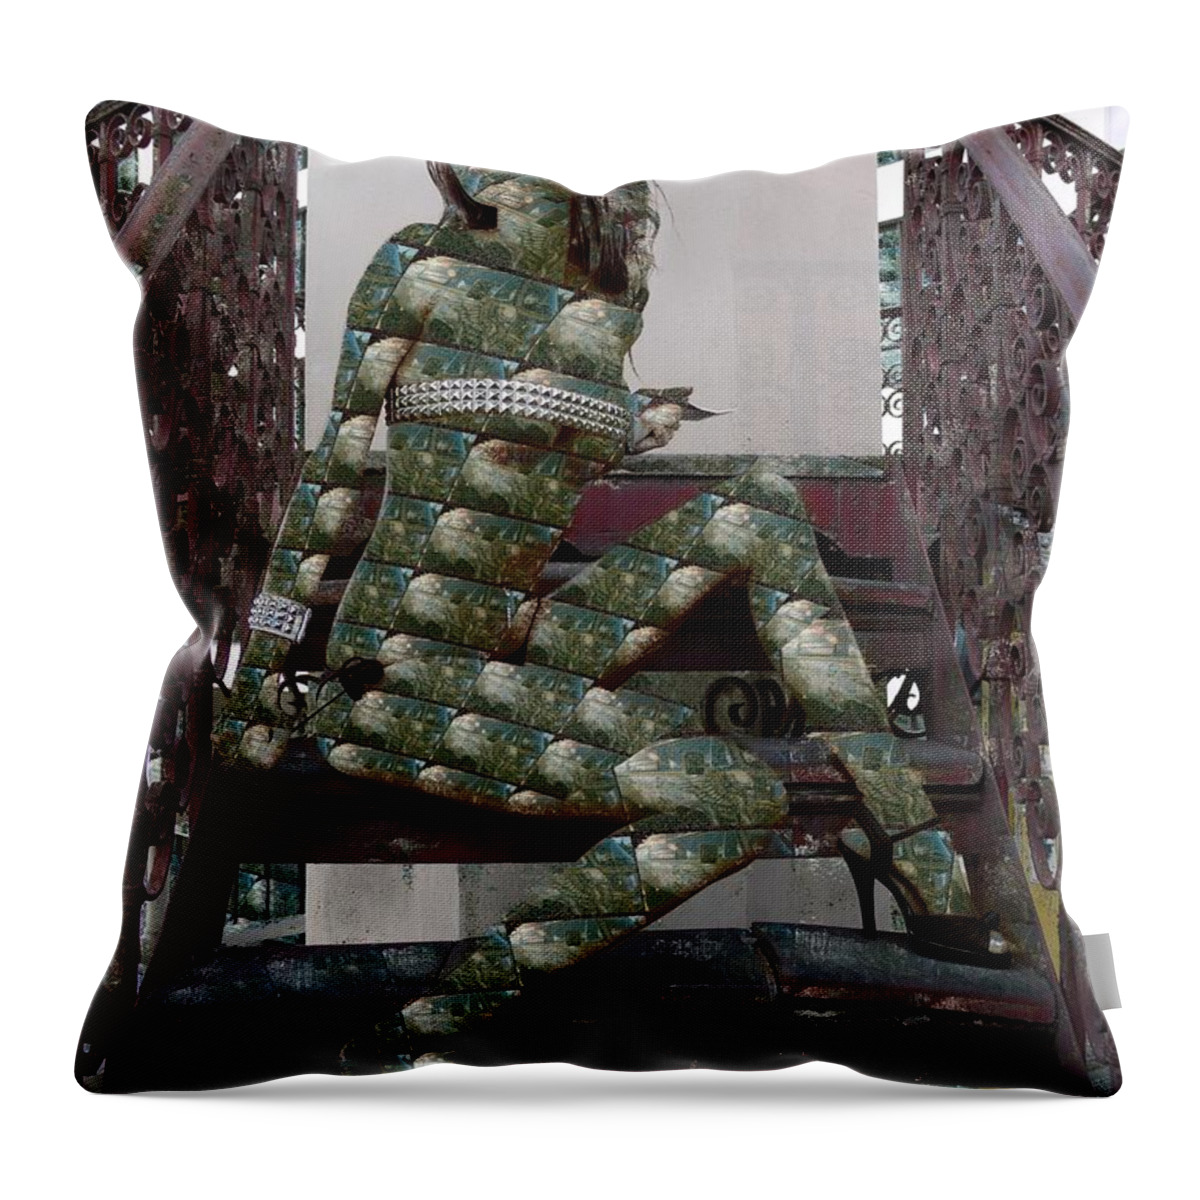 Oifii Throw Pillow featuring the mixed media Keepon Dreaming Army Of One by Stephane Poirier